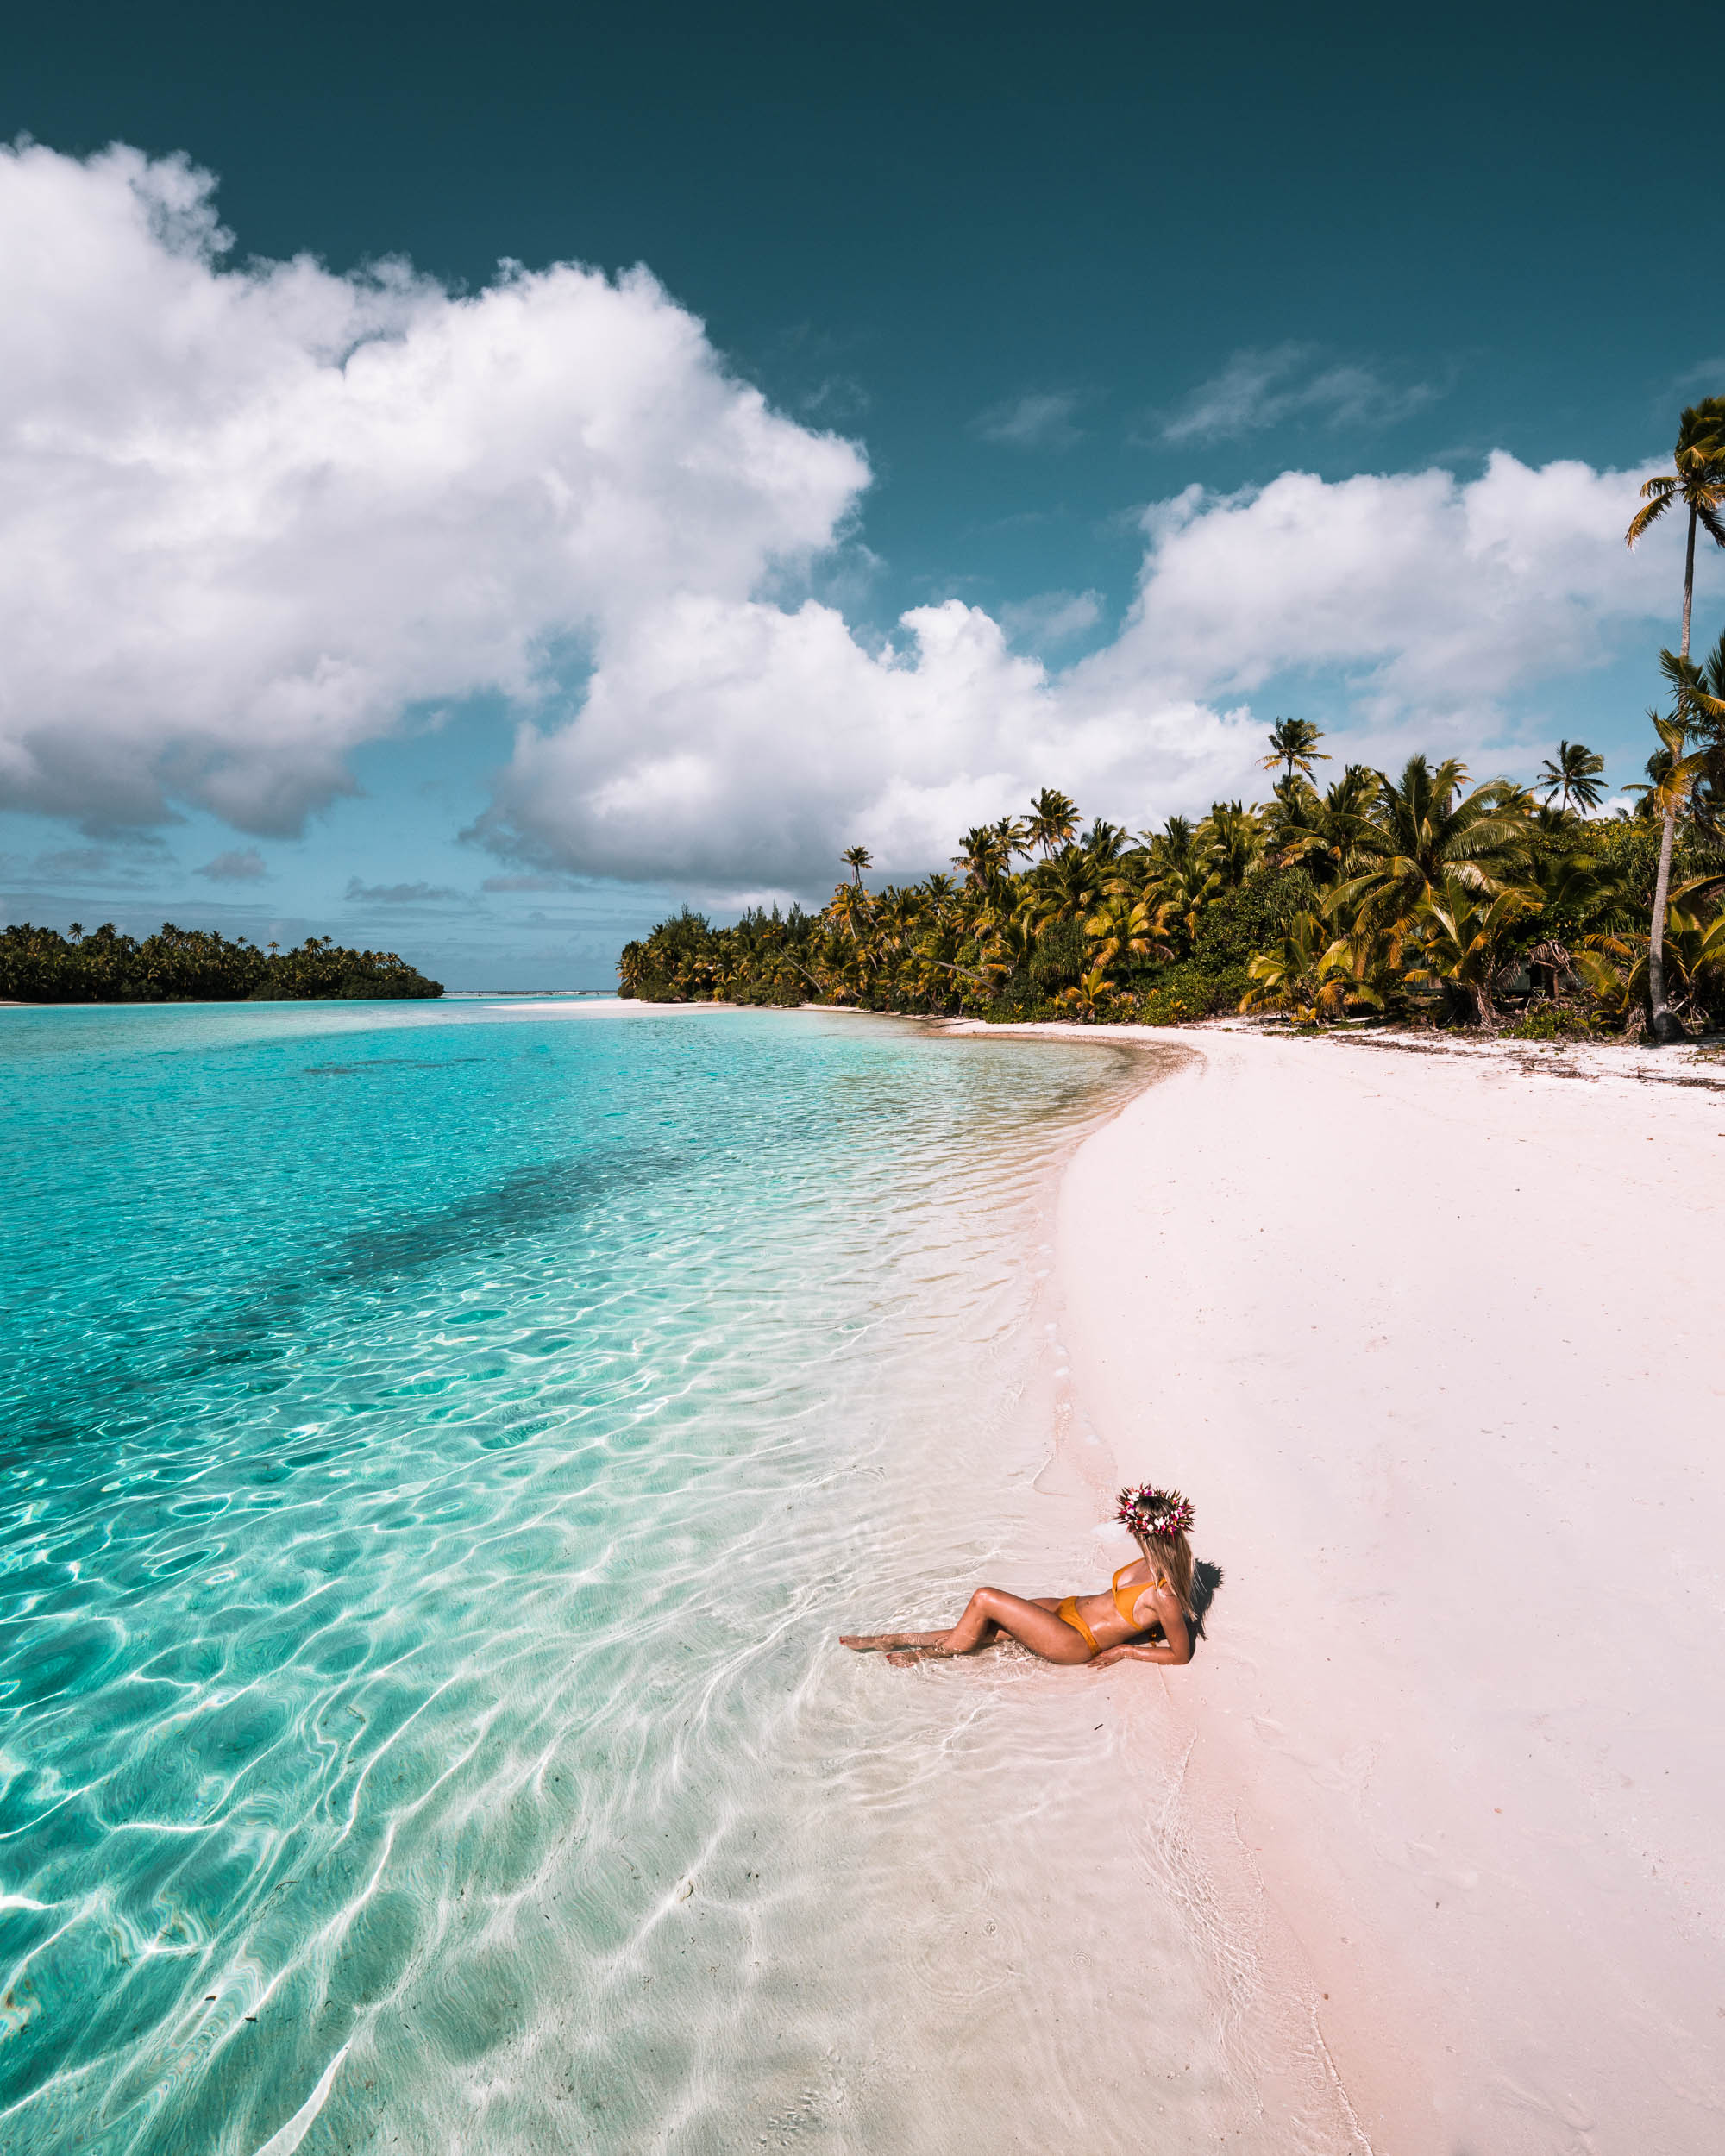 White sand beaches and palms on One Foot Island in Aitutaki, Cook Islands